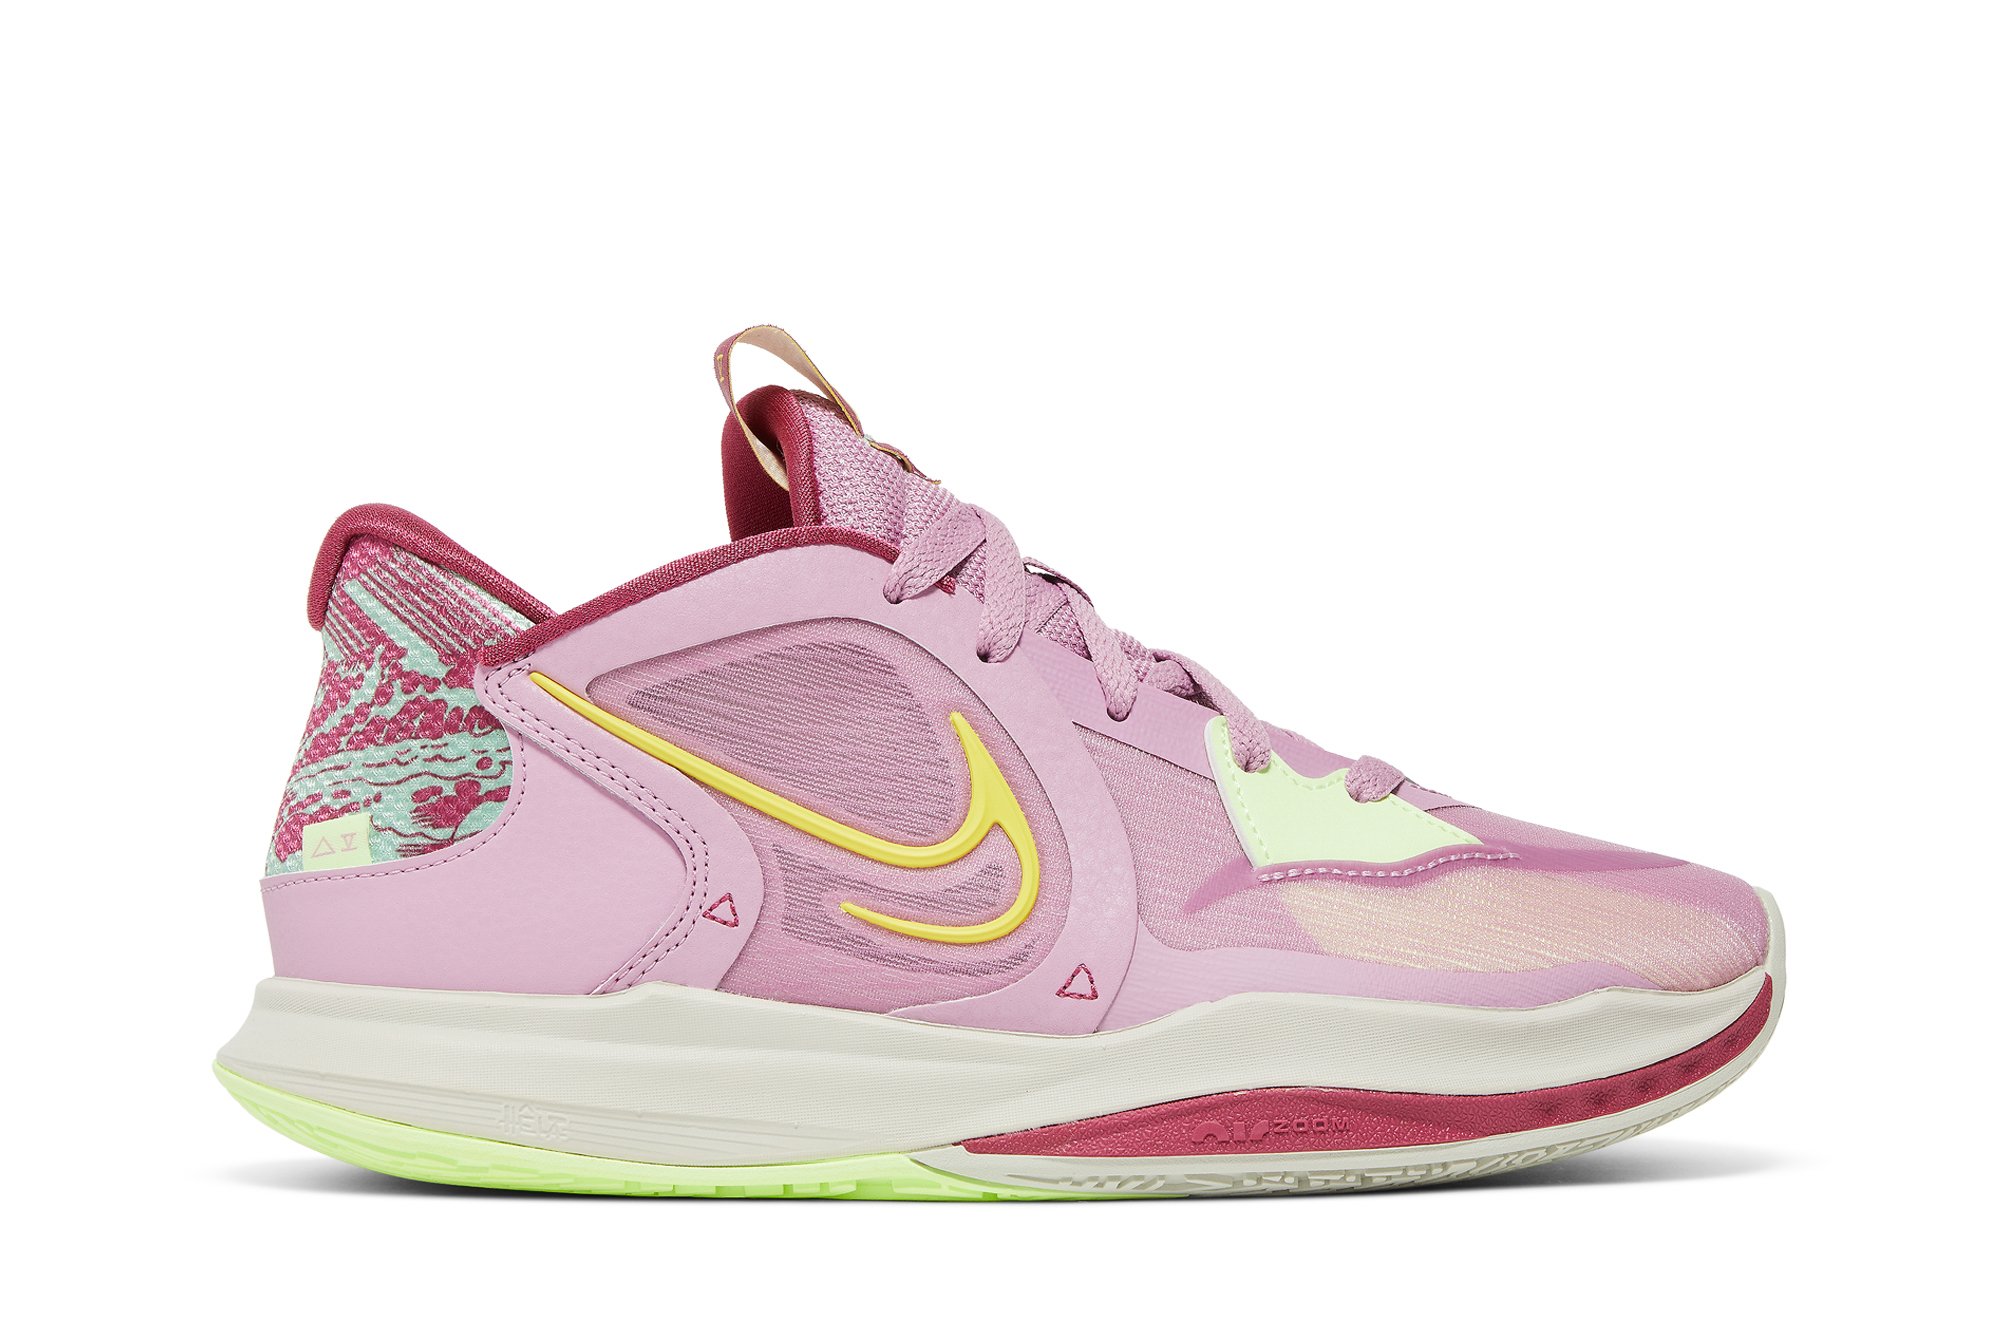 Kyrie Low 5 EP 'Orchid'